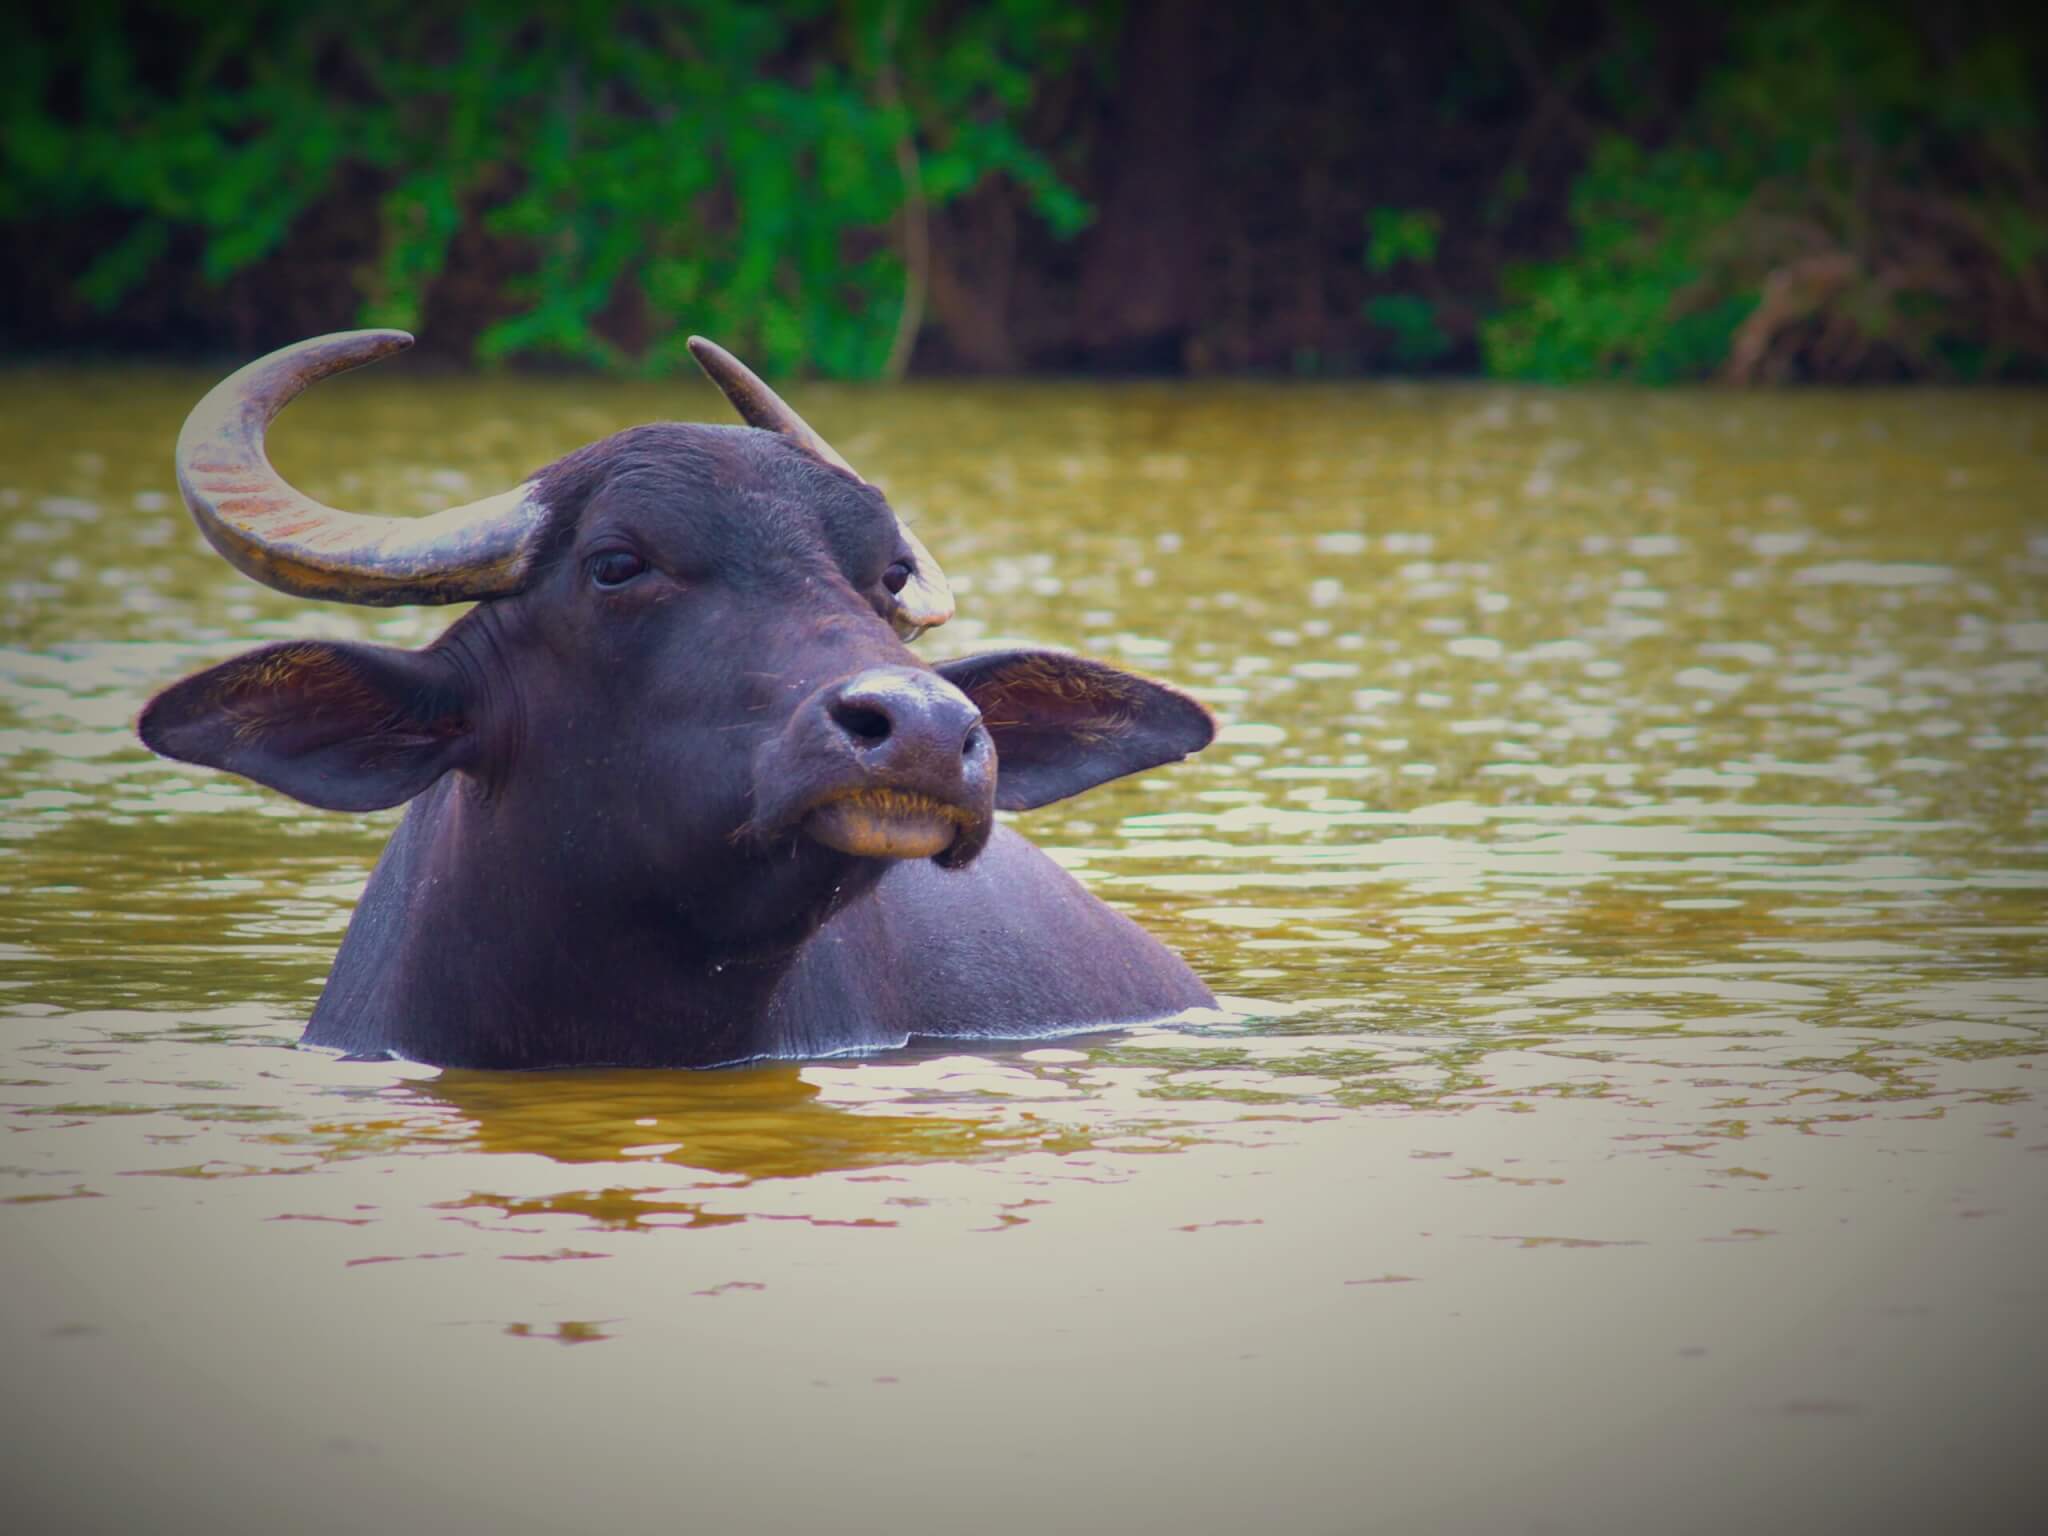 Rescued buffalo Kalu loves swimming in the pond.